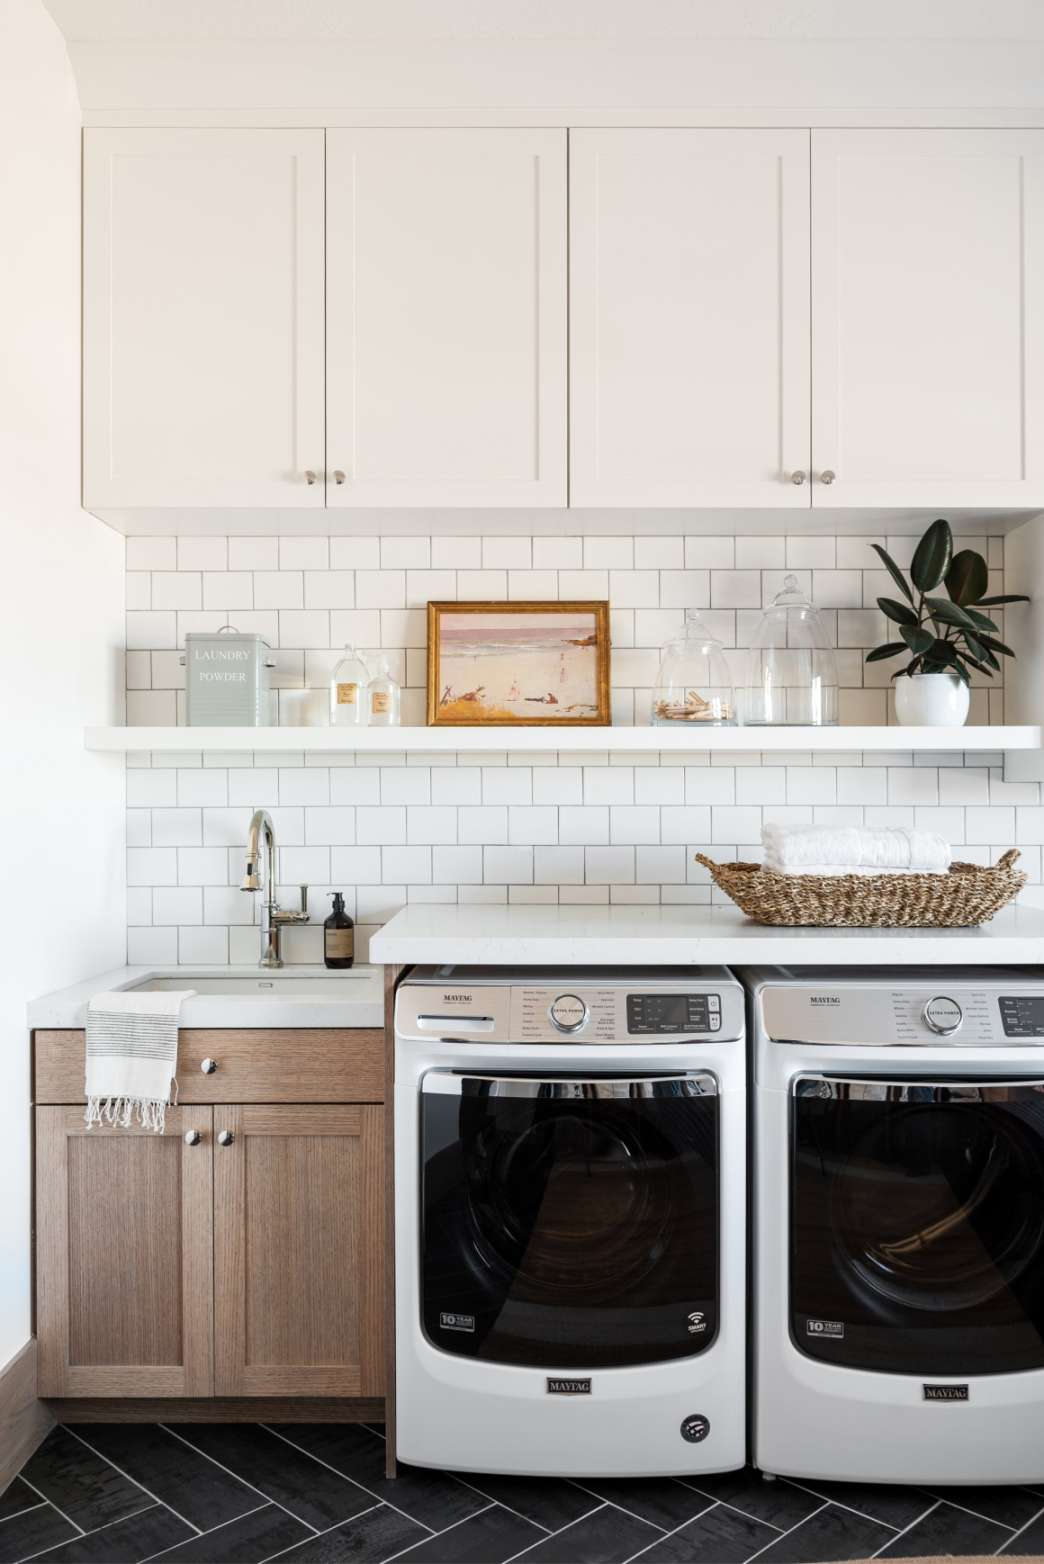 Laundry Room Ideas and Top Recommended Washer and Dryer - Nesting